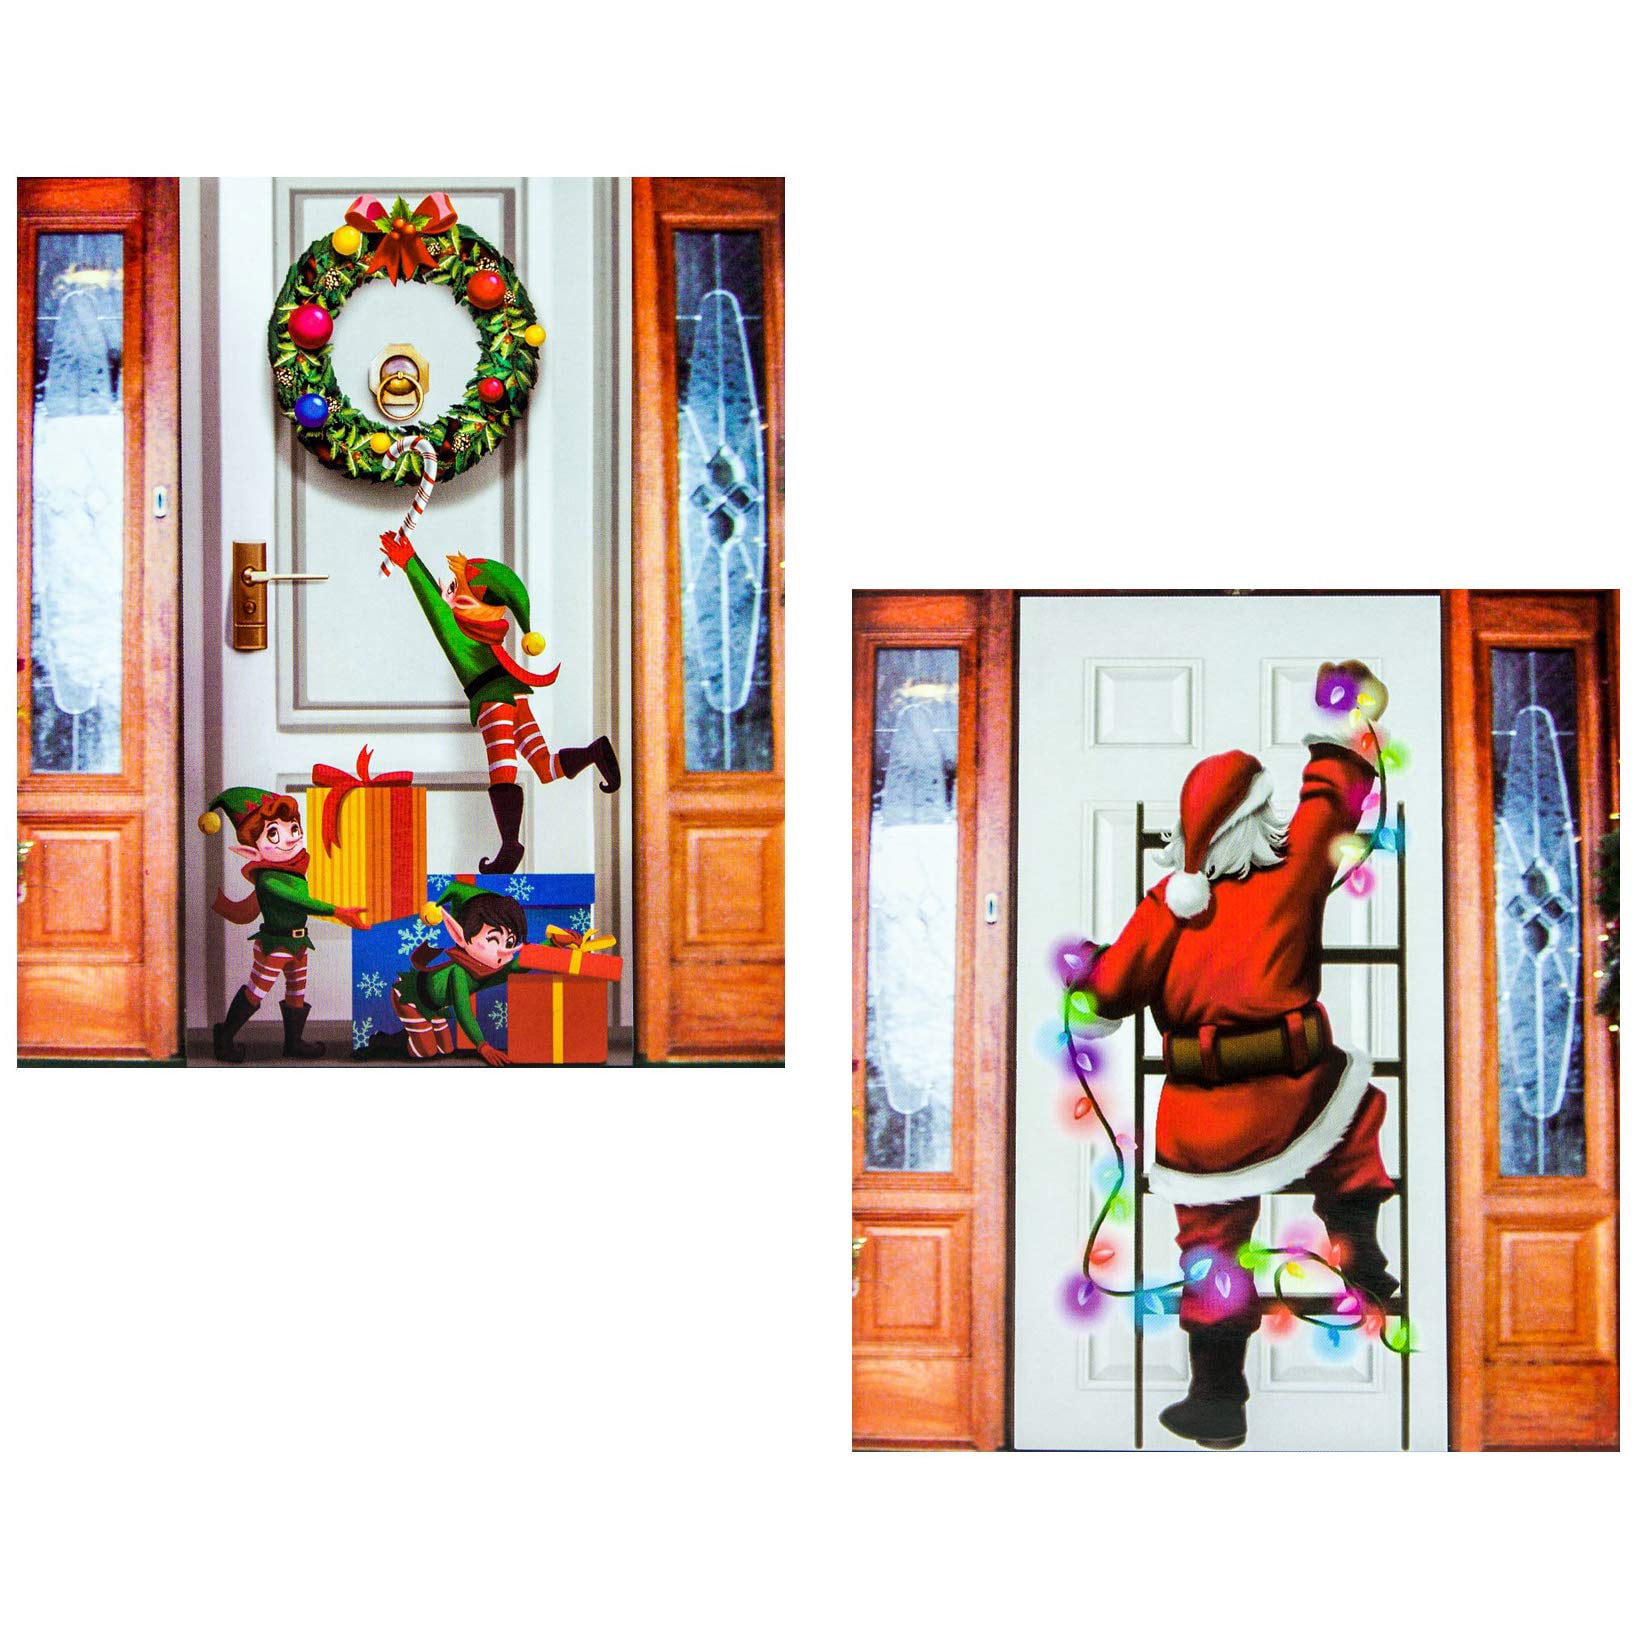 CHRISTMAS SANTA CLAUS HANGING LIGHTS Door Cover Party Decorations Holiday Decor 